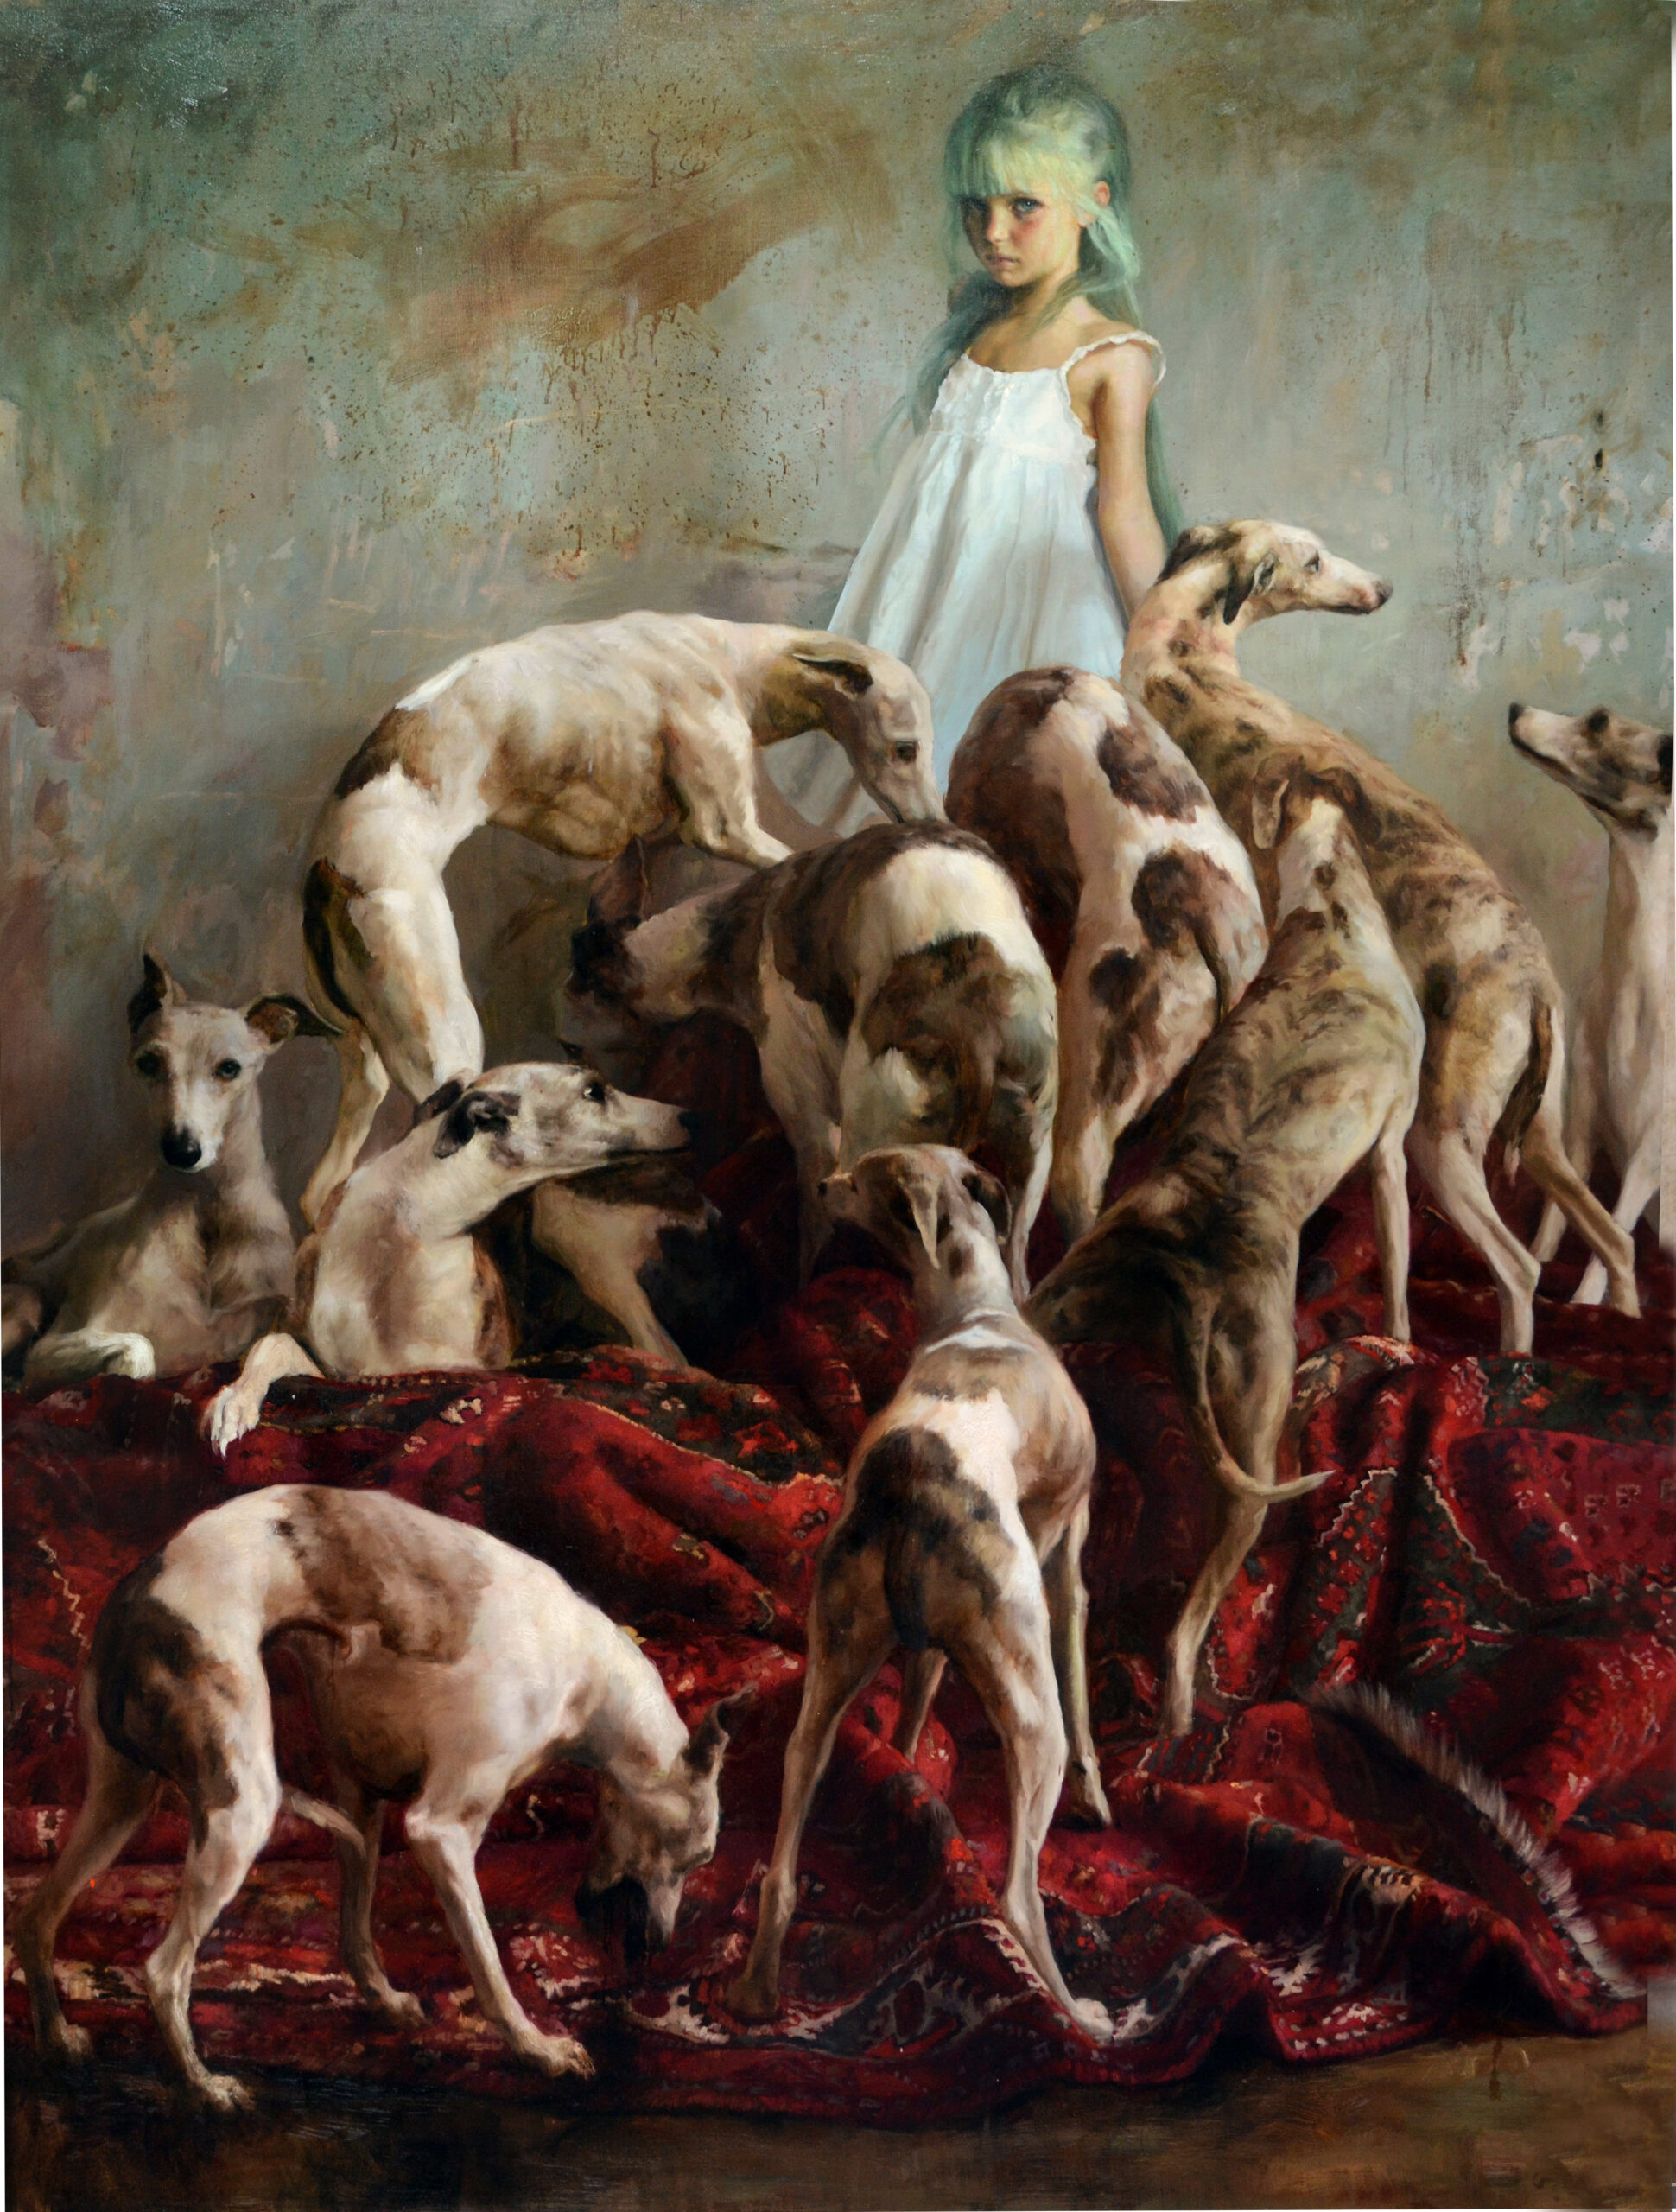 Narrative painting - Guillermo Lorca, "Laura and the Dogs," 2012, oil on canvas, 78 3/4 x 59 in., private collection